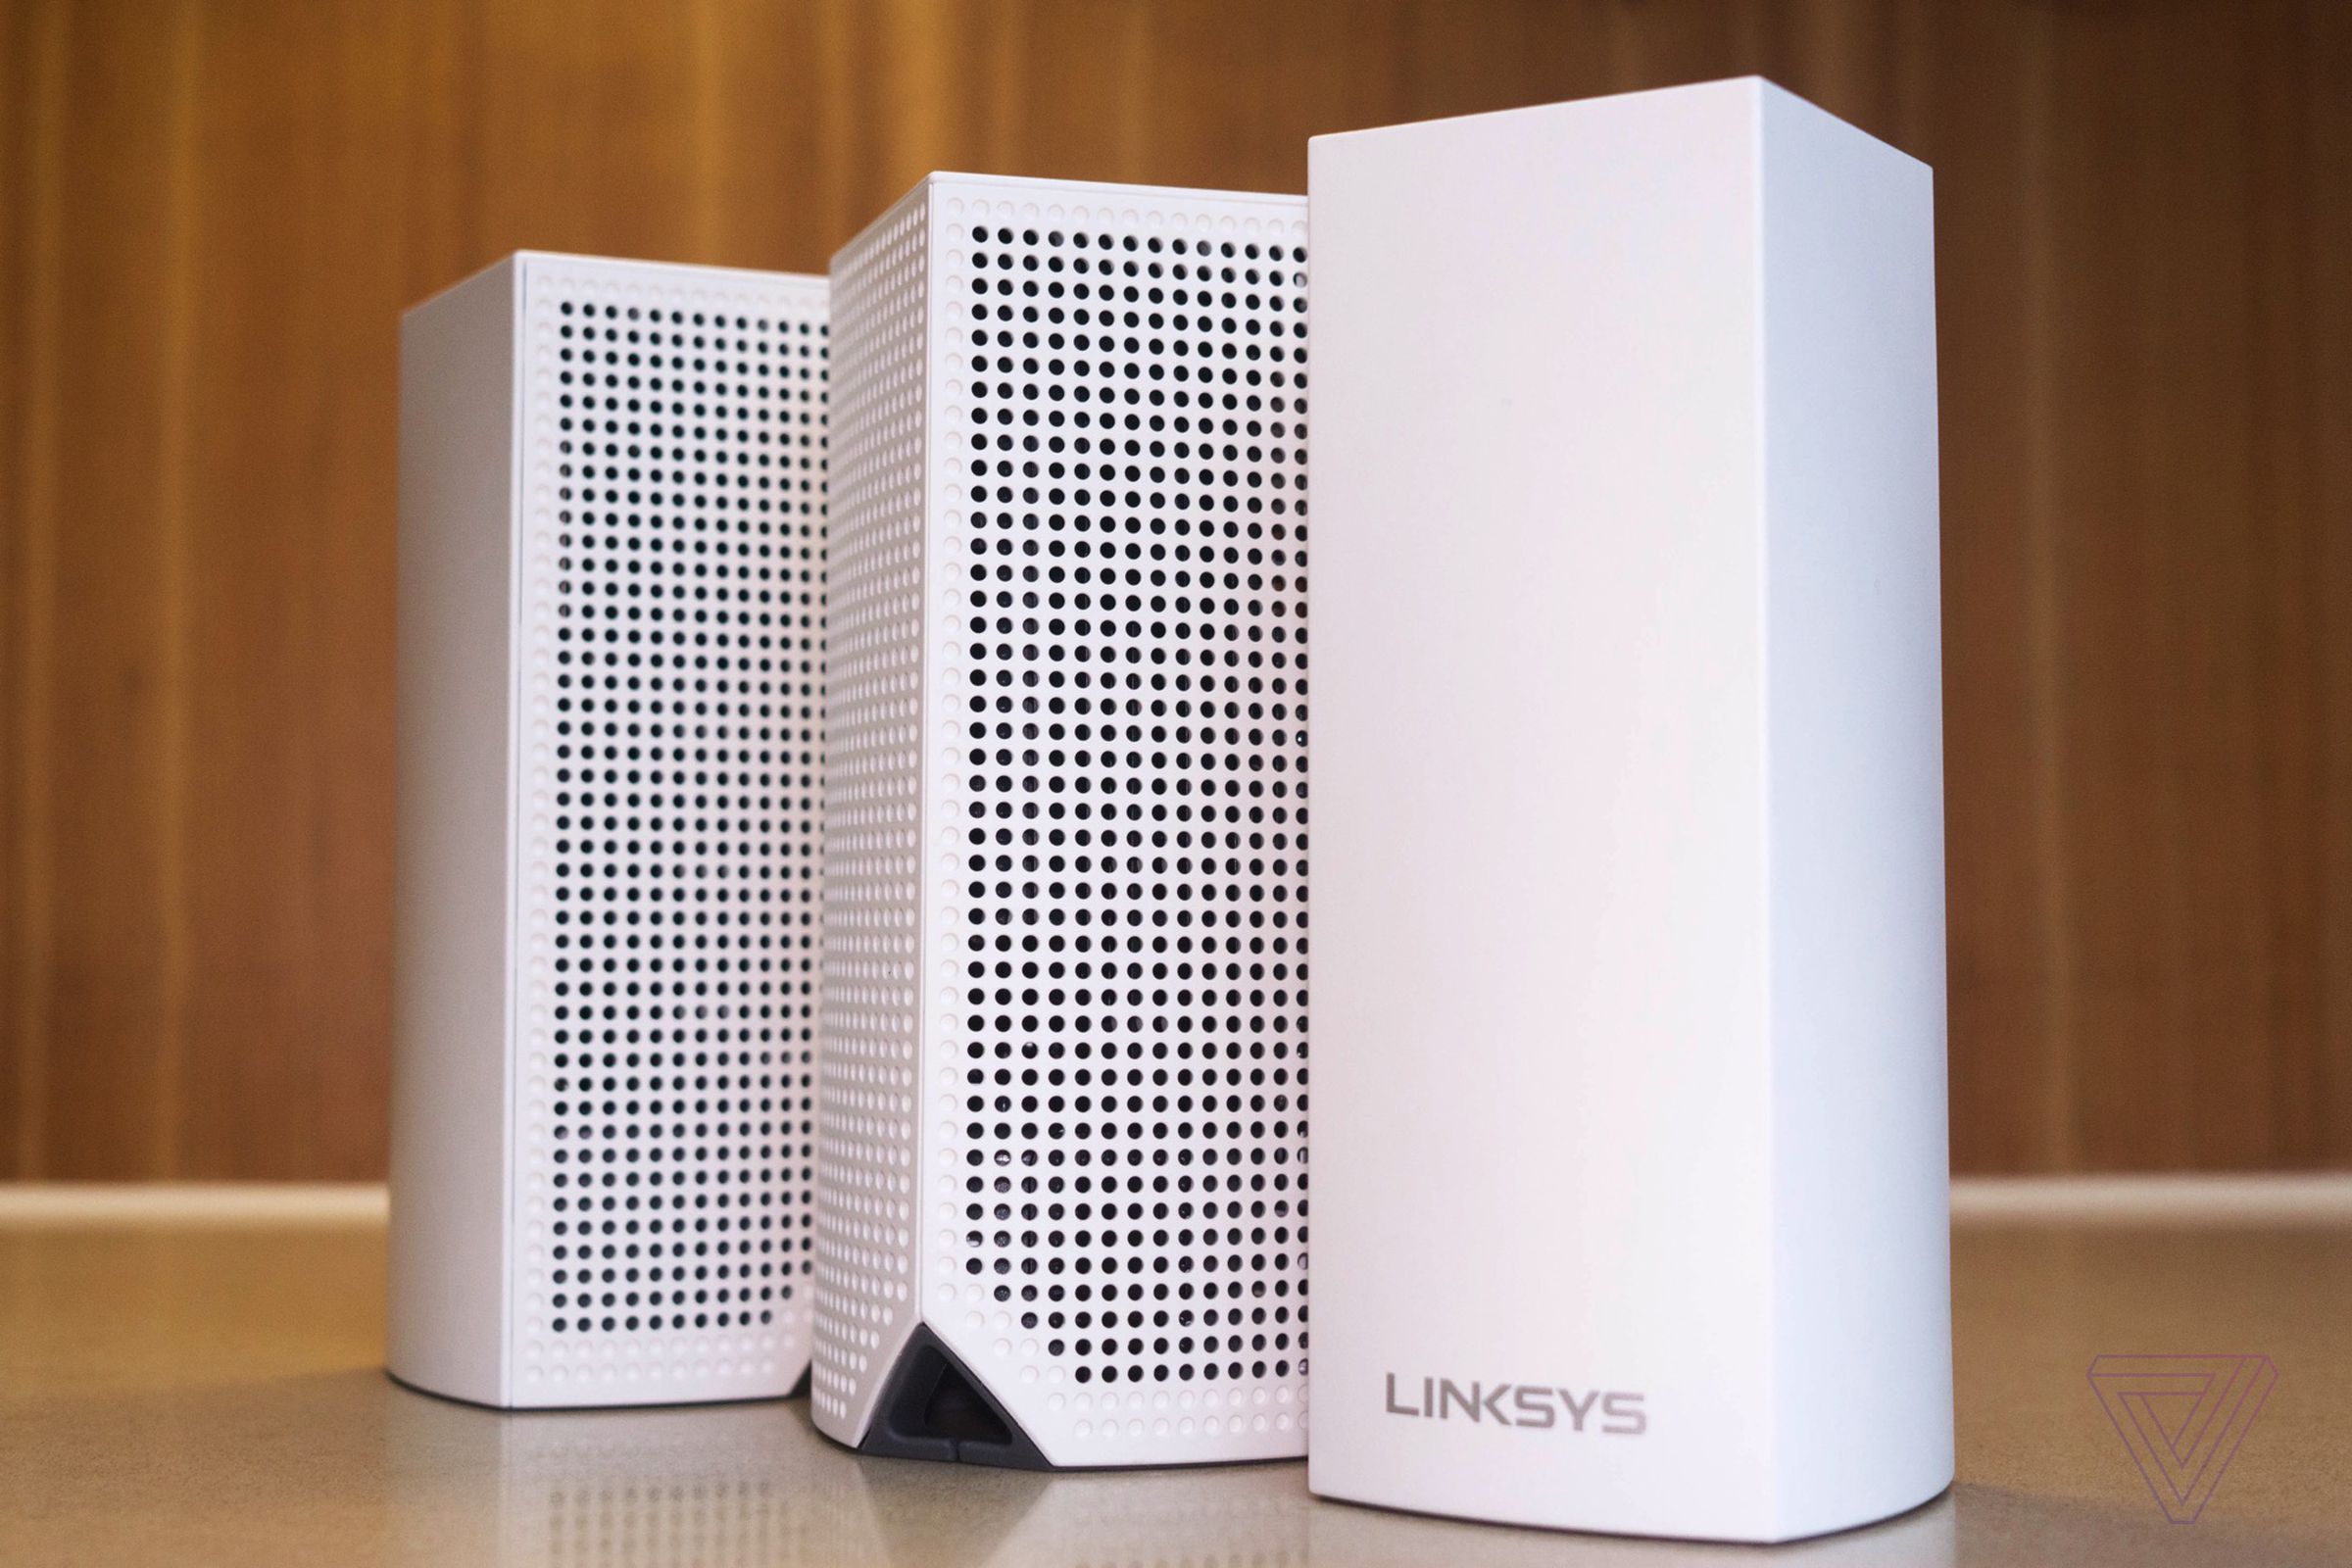 Linksys Velop router